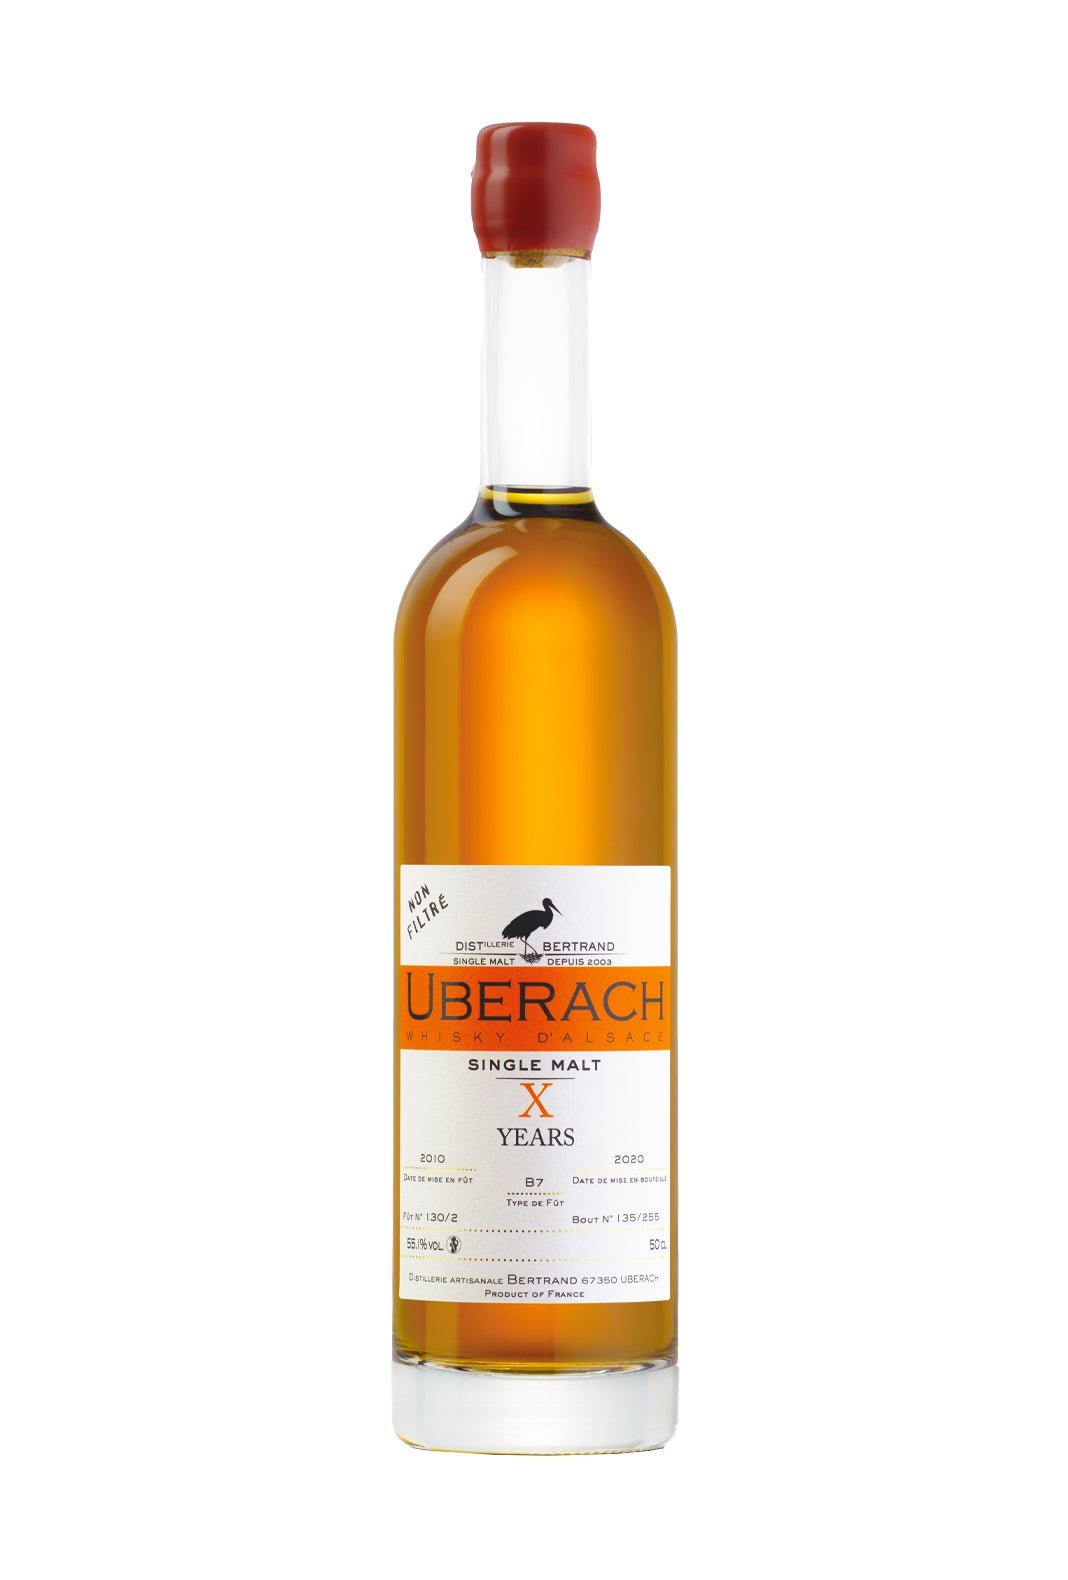 Bertrand Uberach "X" 10 years 51.2% 500ml | Whiskey | Shop online at Spirits of France